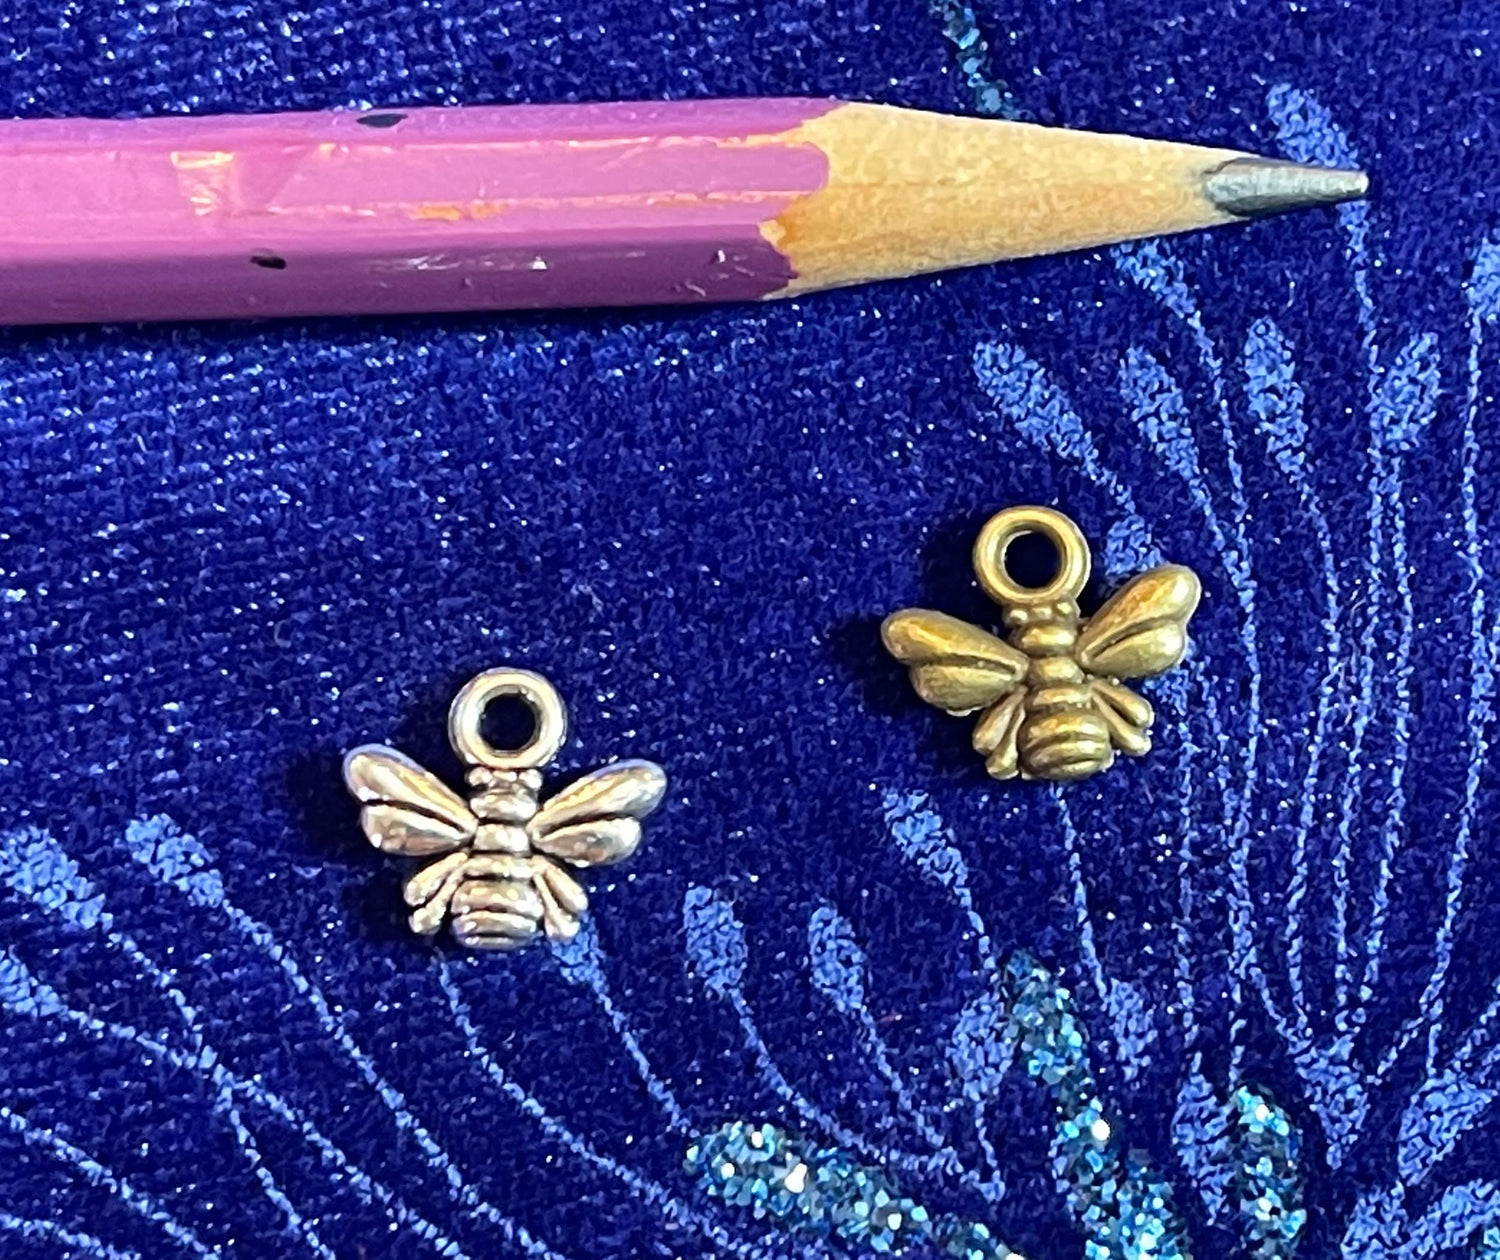 Tiny Bee Charms choice of 2, 6 or 12 - Silver and Bronze tone Honey Be